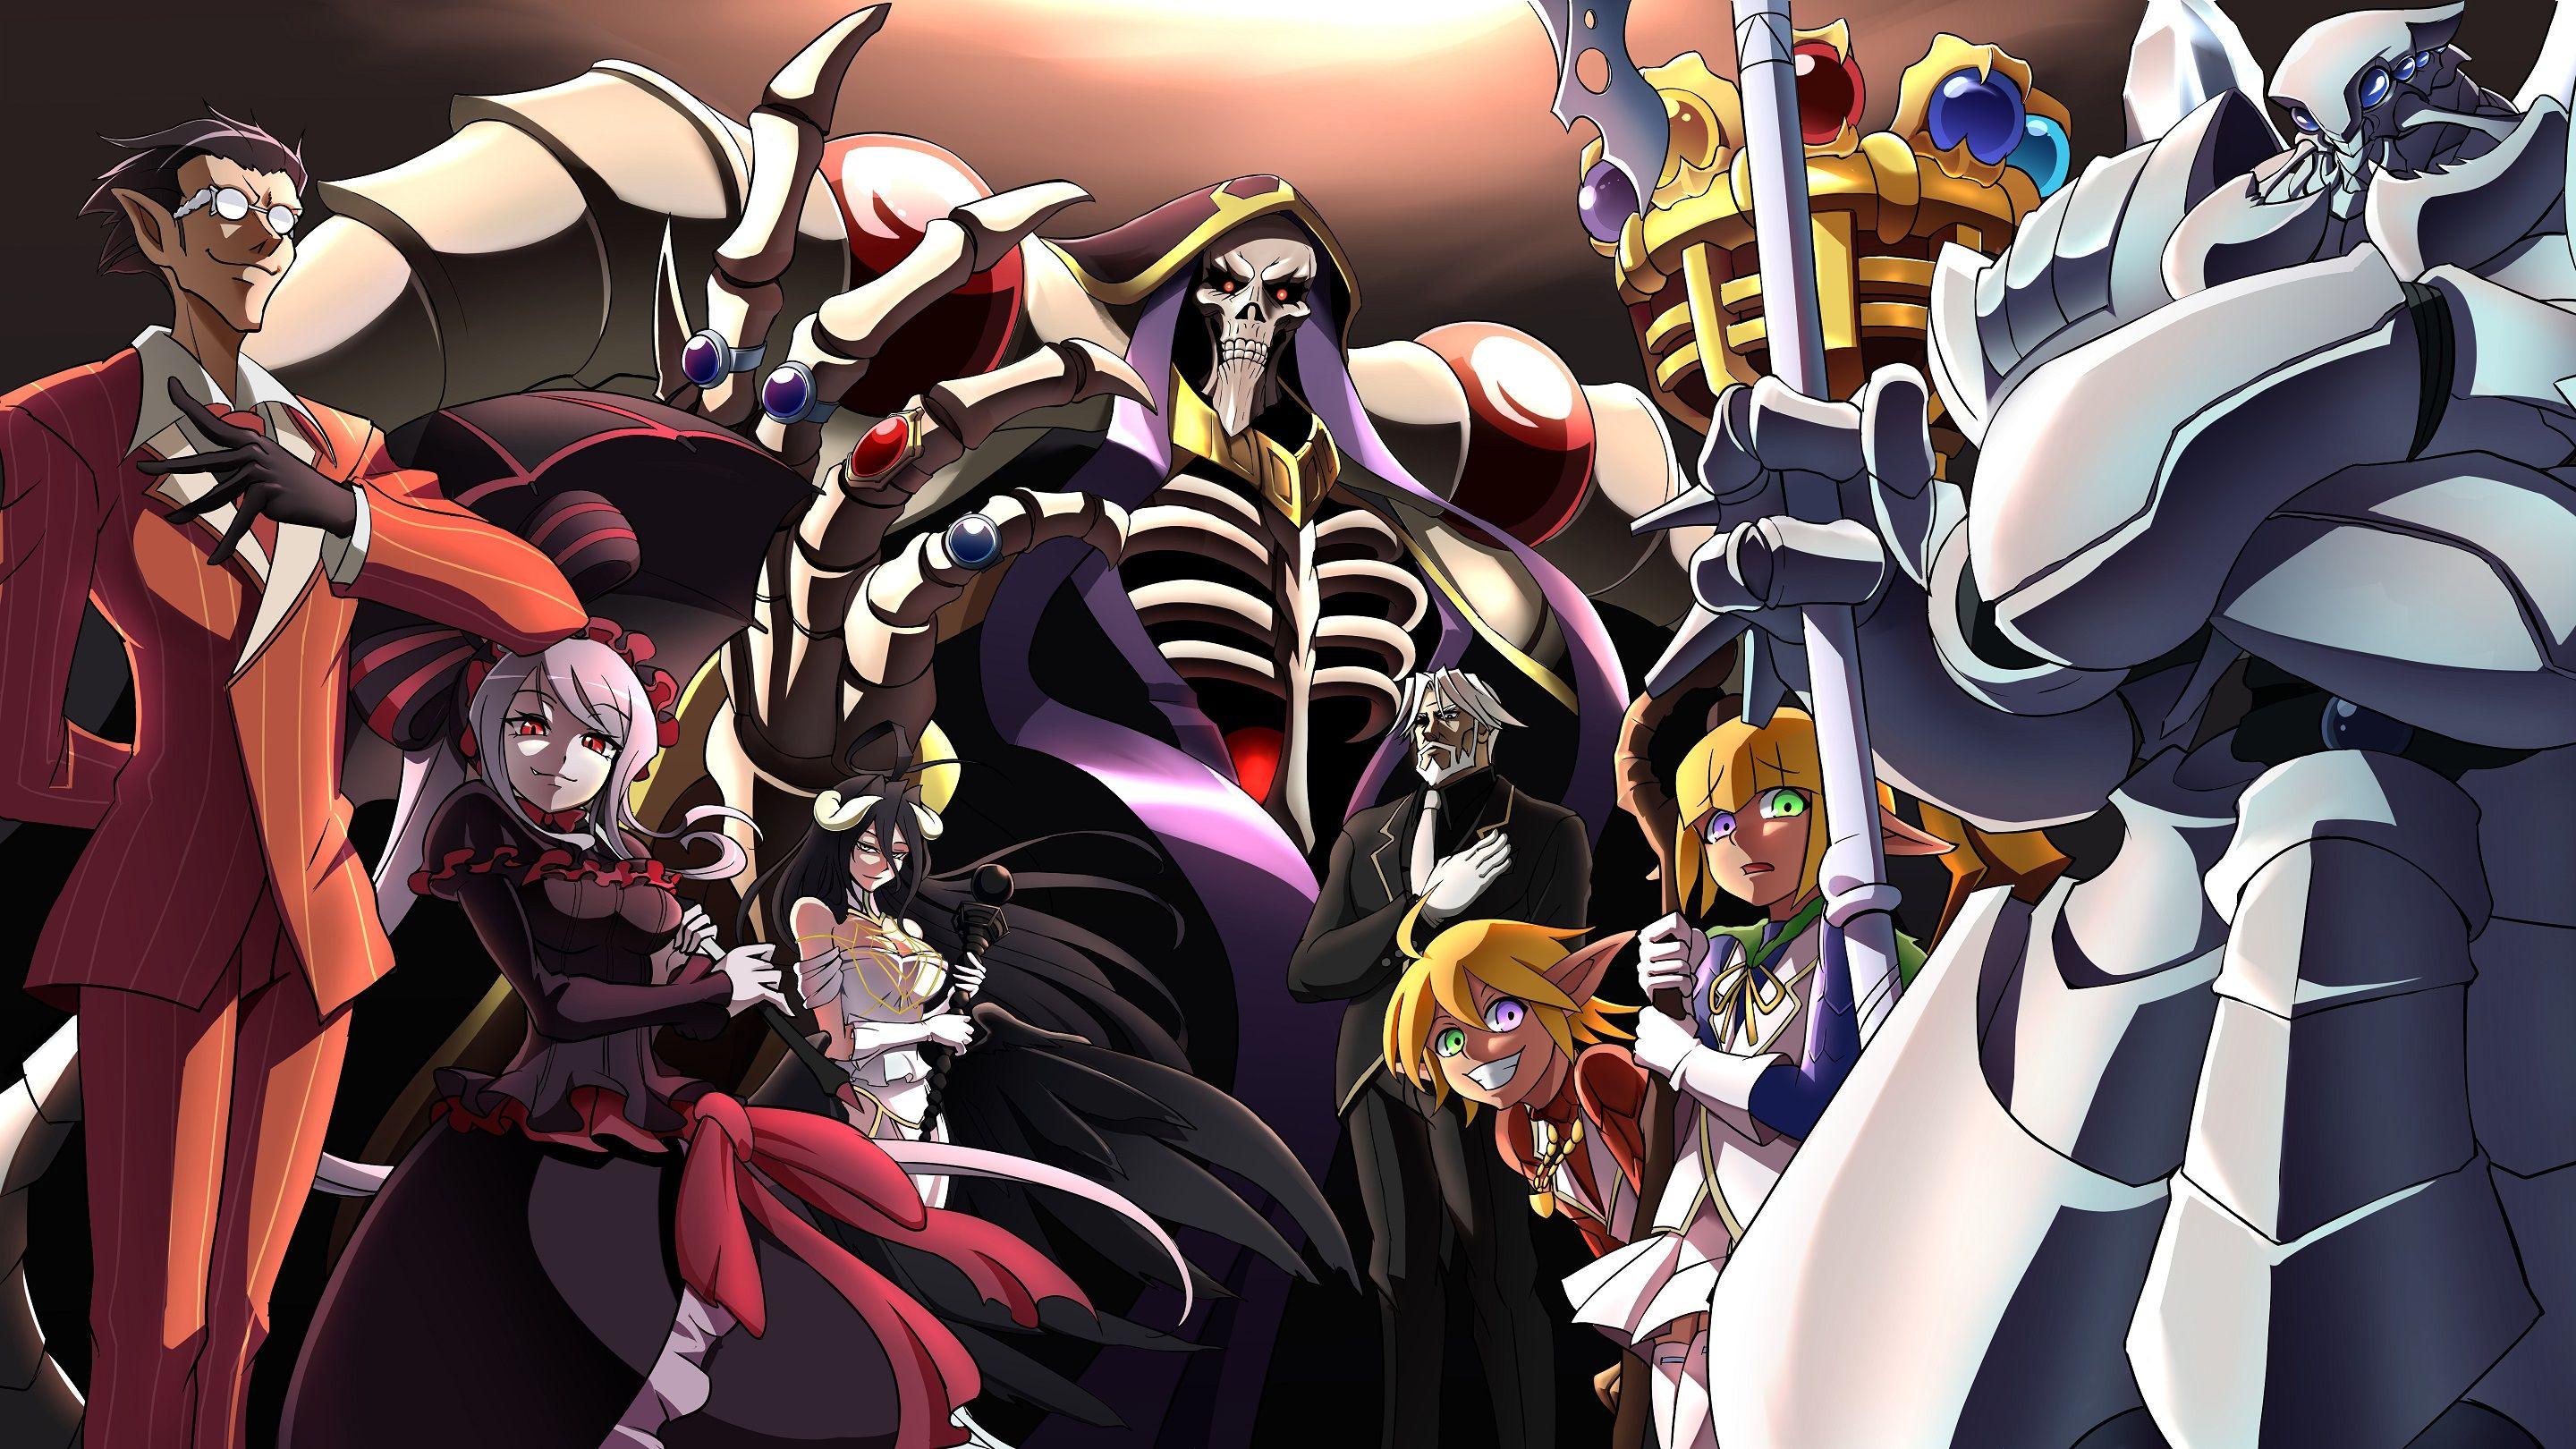 11 Anime Overlord Iphone Wallpaper Sachi Wallpaper